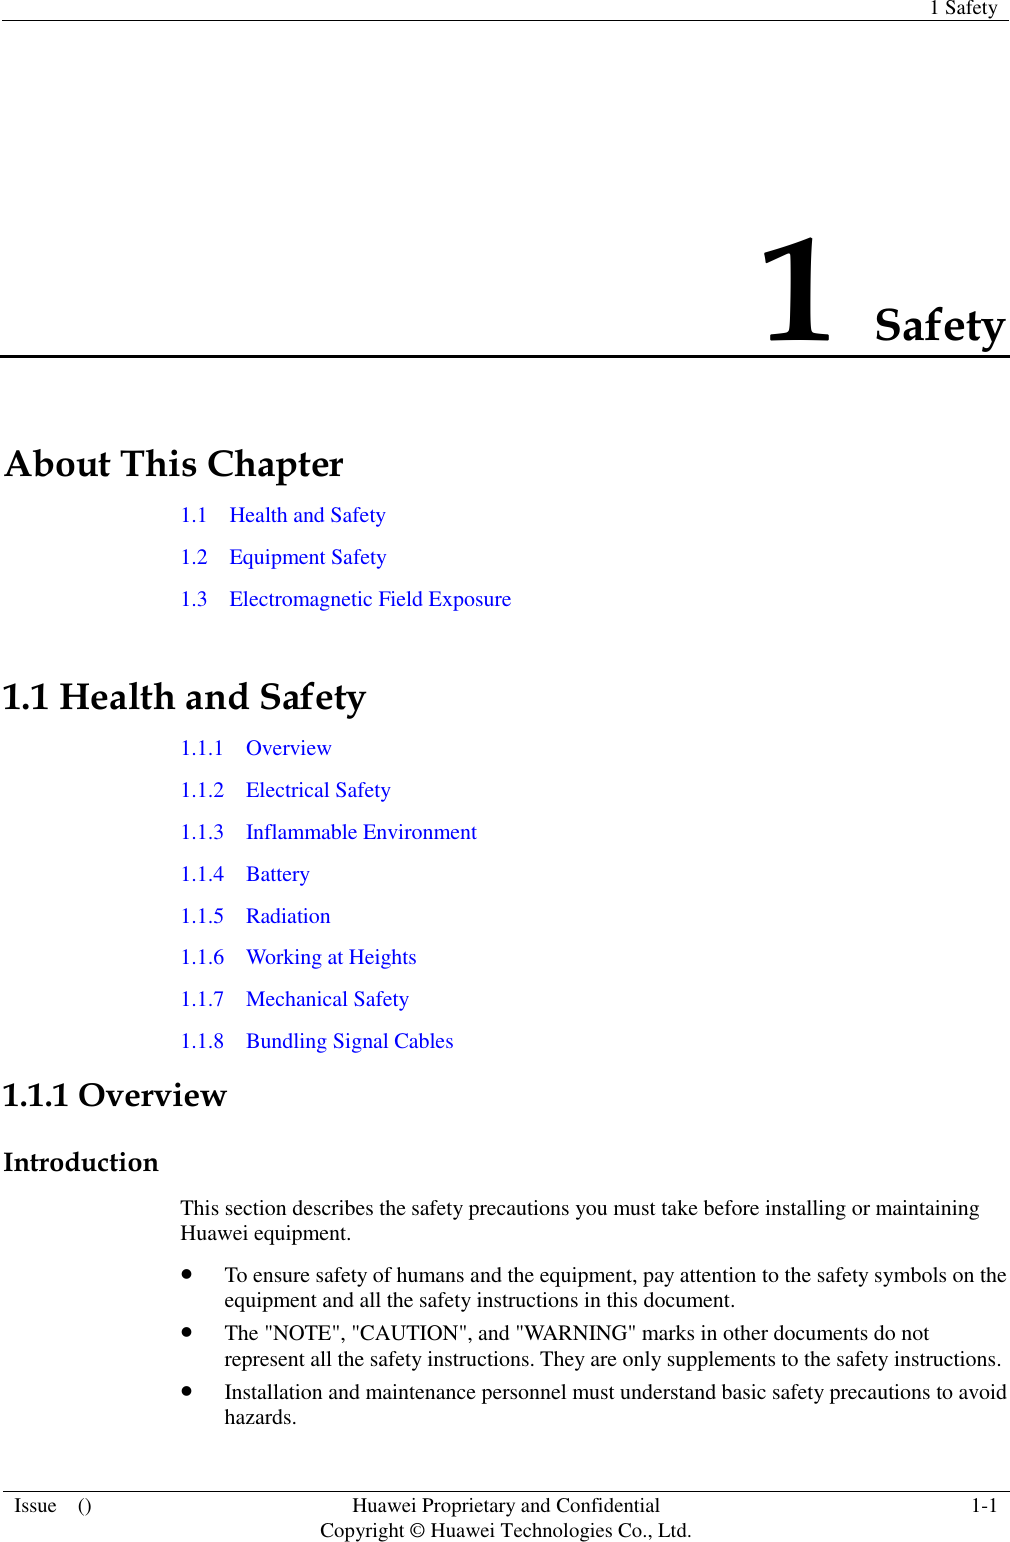   1 Safety  Issue    () Huawei Proprietary and Confidential                                     Copyright © Huawei Technologies Co., Ltd. 1-1  1 Safety About This Chapter 1.1    Health and Safety 1.2    Equipment Safety 1.3    Electromagnetic Field Exposure 1.1 Health and Safety 1.1.1    Overview 1.1.2    Electrical Safety 1.1.3    Inflammable Environment 1.1.4    Battery 1.1.5    Radiation 1.1.6    Working at Heights 1.1.7    Mechanical Safety 1.1.8    Bundling Signal Cables 1.1.1 Overview Introduction This section describes the safety precautions you must take before installing or maintaining Huawei equipment.  To ensure safety of humans and the equipment, pay attention to the safety symbols on the equipment and all the safety instructions in this document.  The &quot;NOTE&quot;, &quot;CAUTION&quot;, and &quot;WARNING&quot; marks in other documents do not represent all the safety instructions. They are only supplements to the safety instructions.  Installation and maintenance personnel must understand basic safety precautions to avoid hazards. 